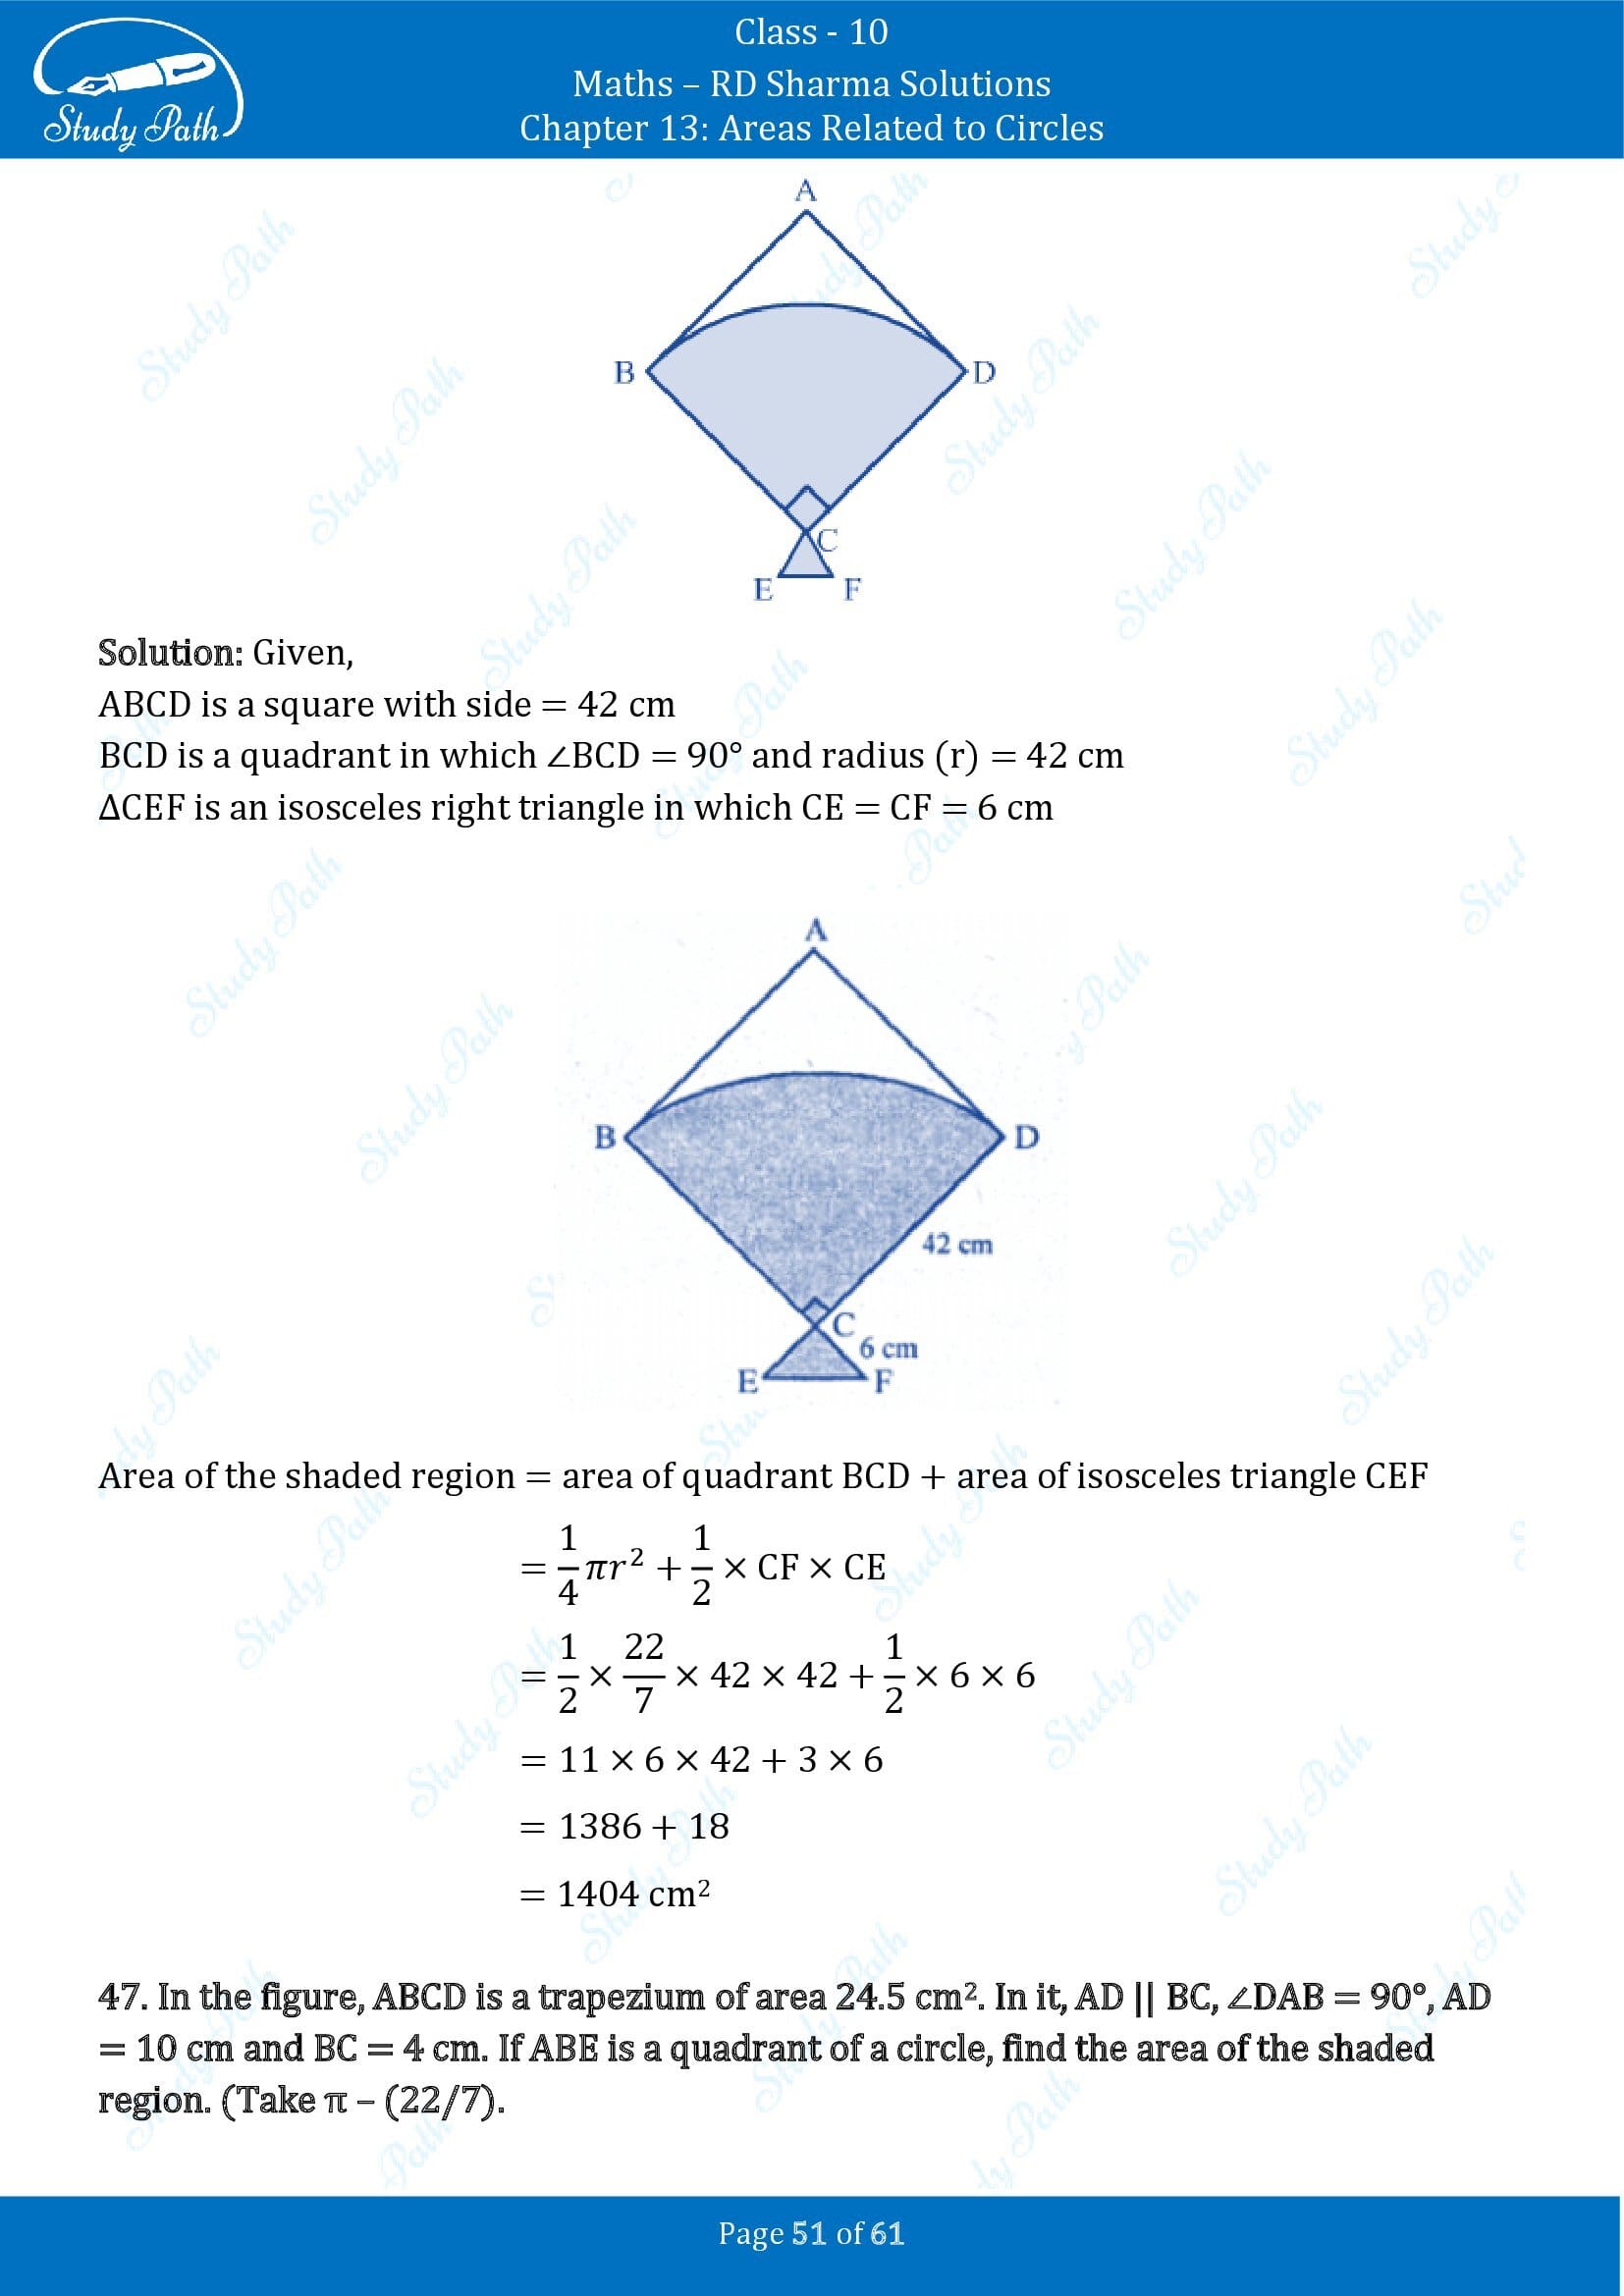 RD Sharma Solutions Class 10 Chapter 13 Areas Related to Circles Exercise 13.4 00051